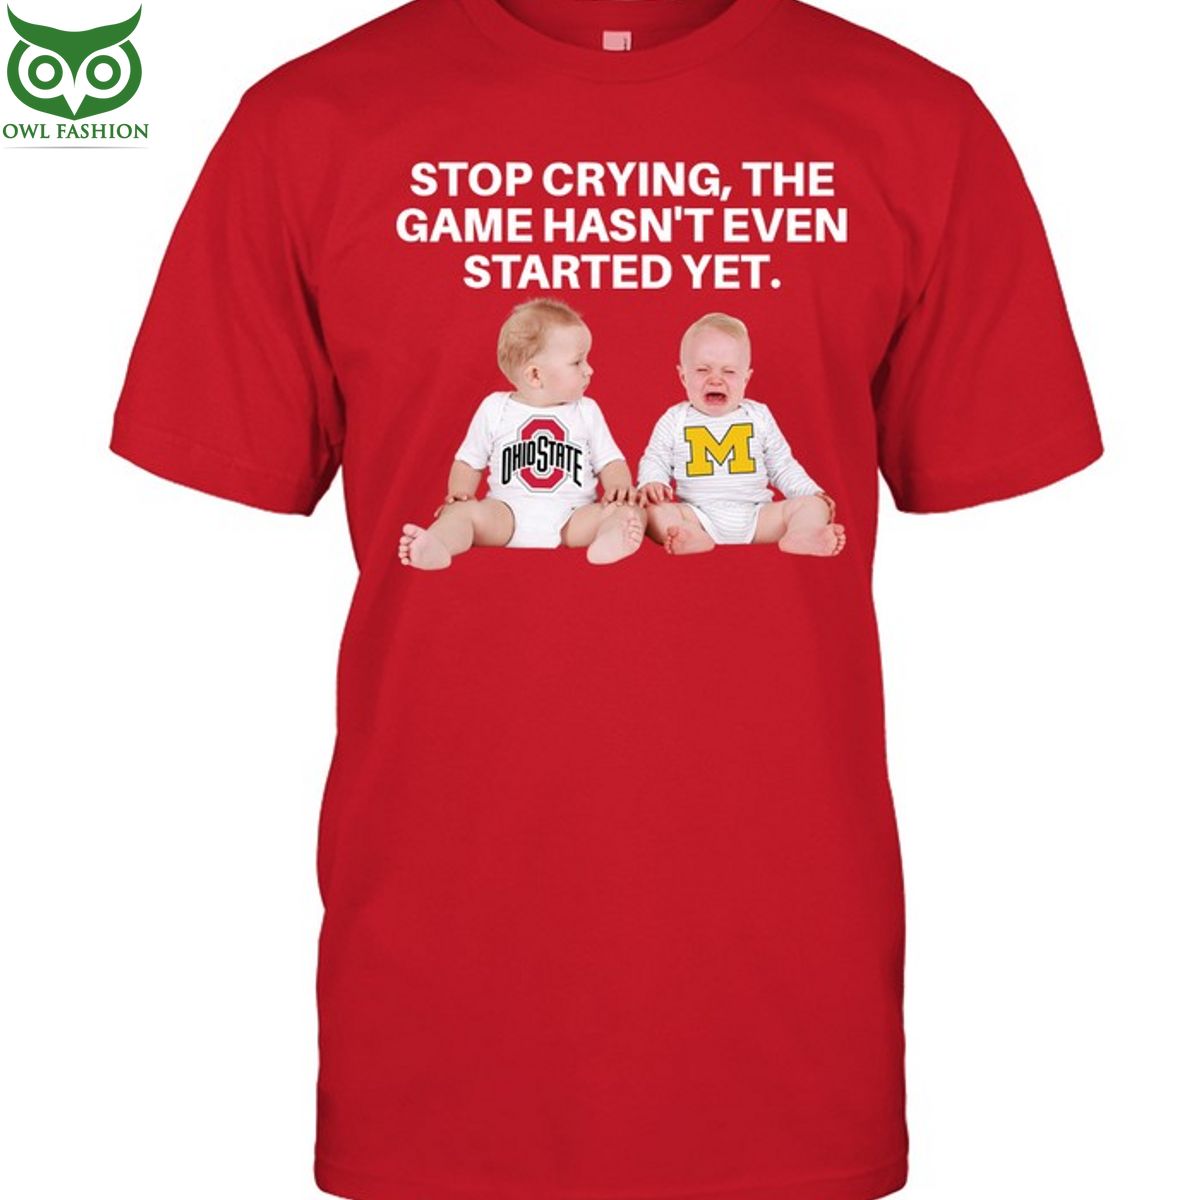 stop crying babies baby the game hasnt even started yet t shirt michigan vs ohio state 1 TkIss.jpg